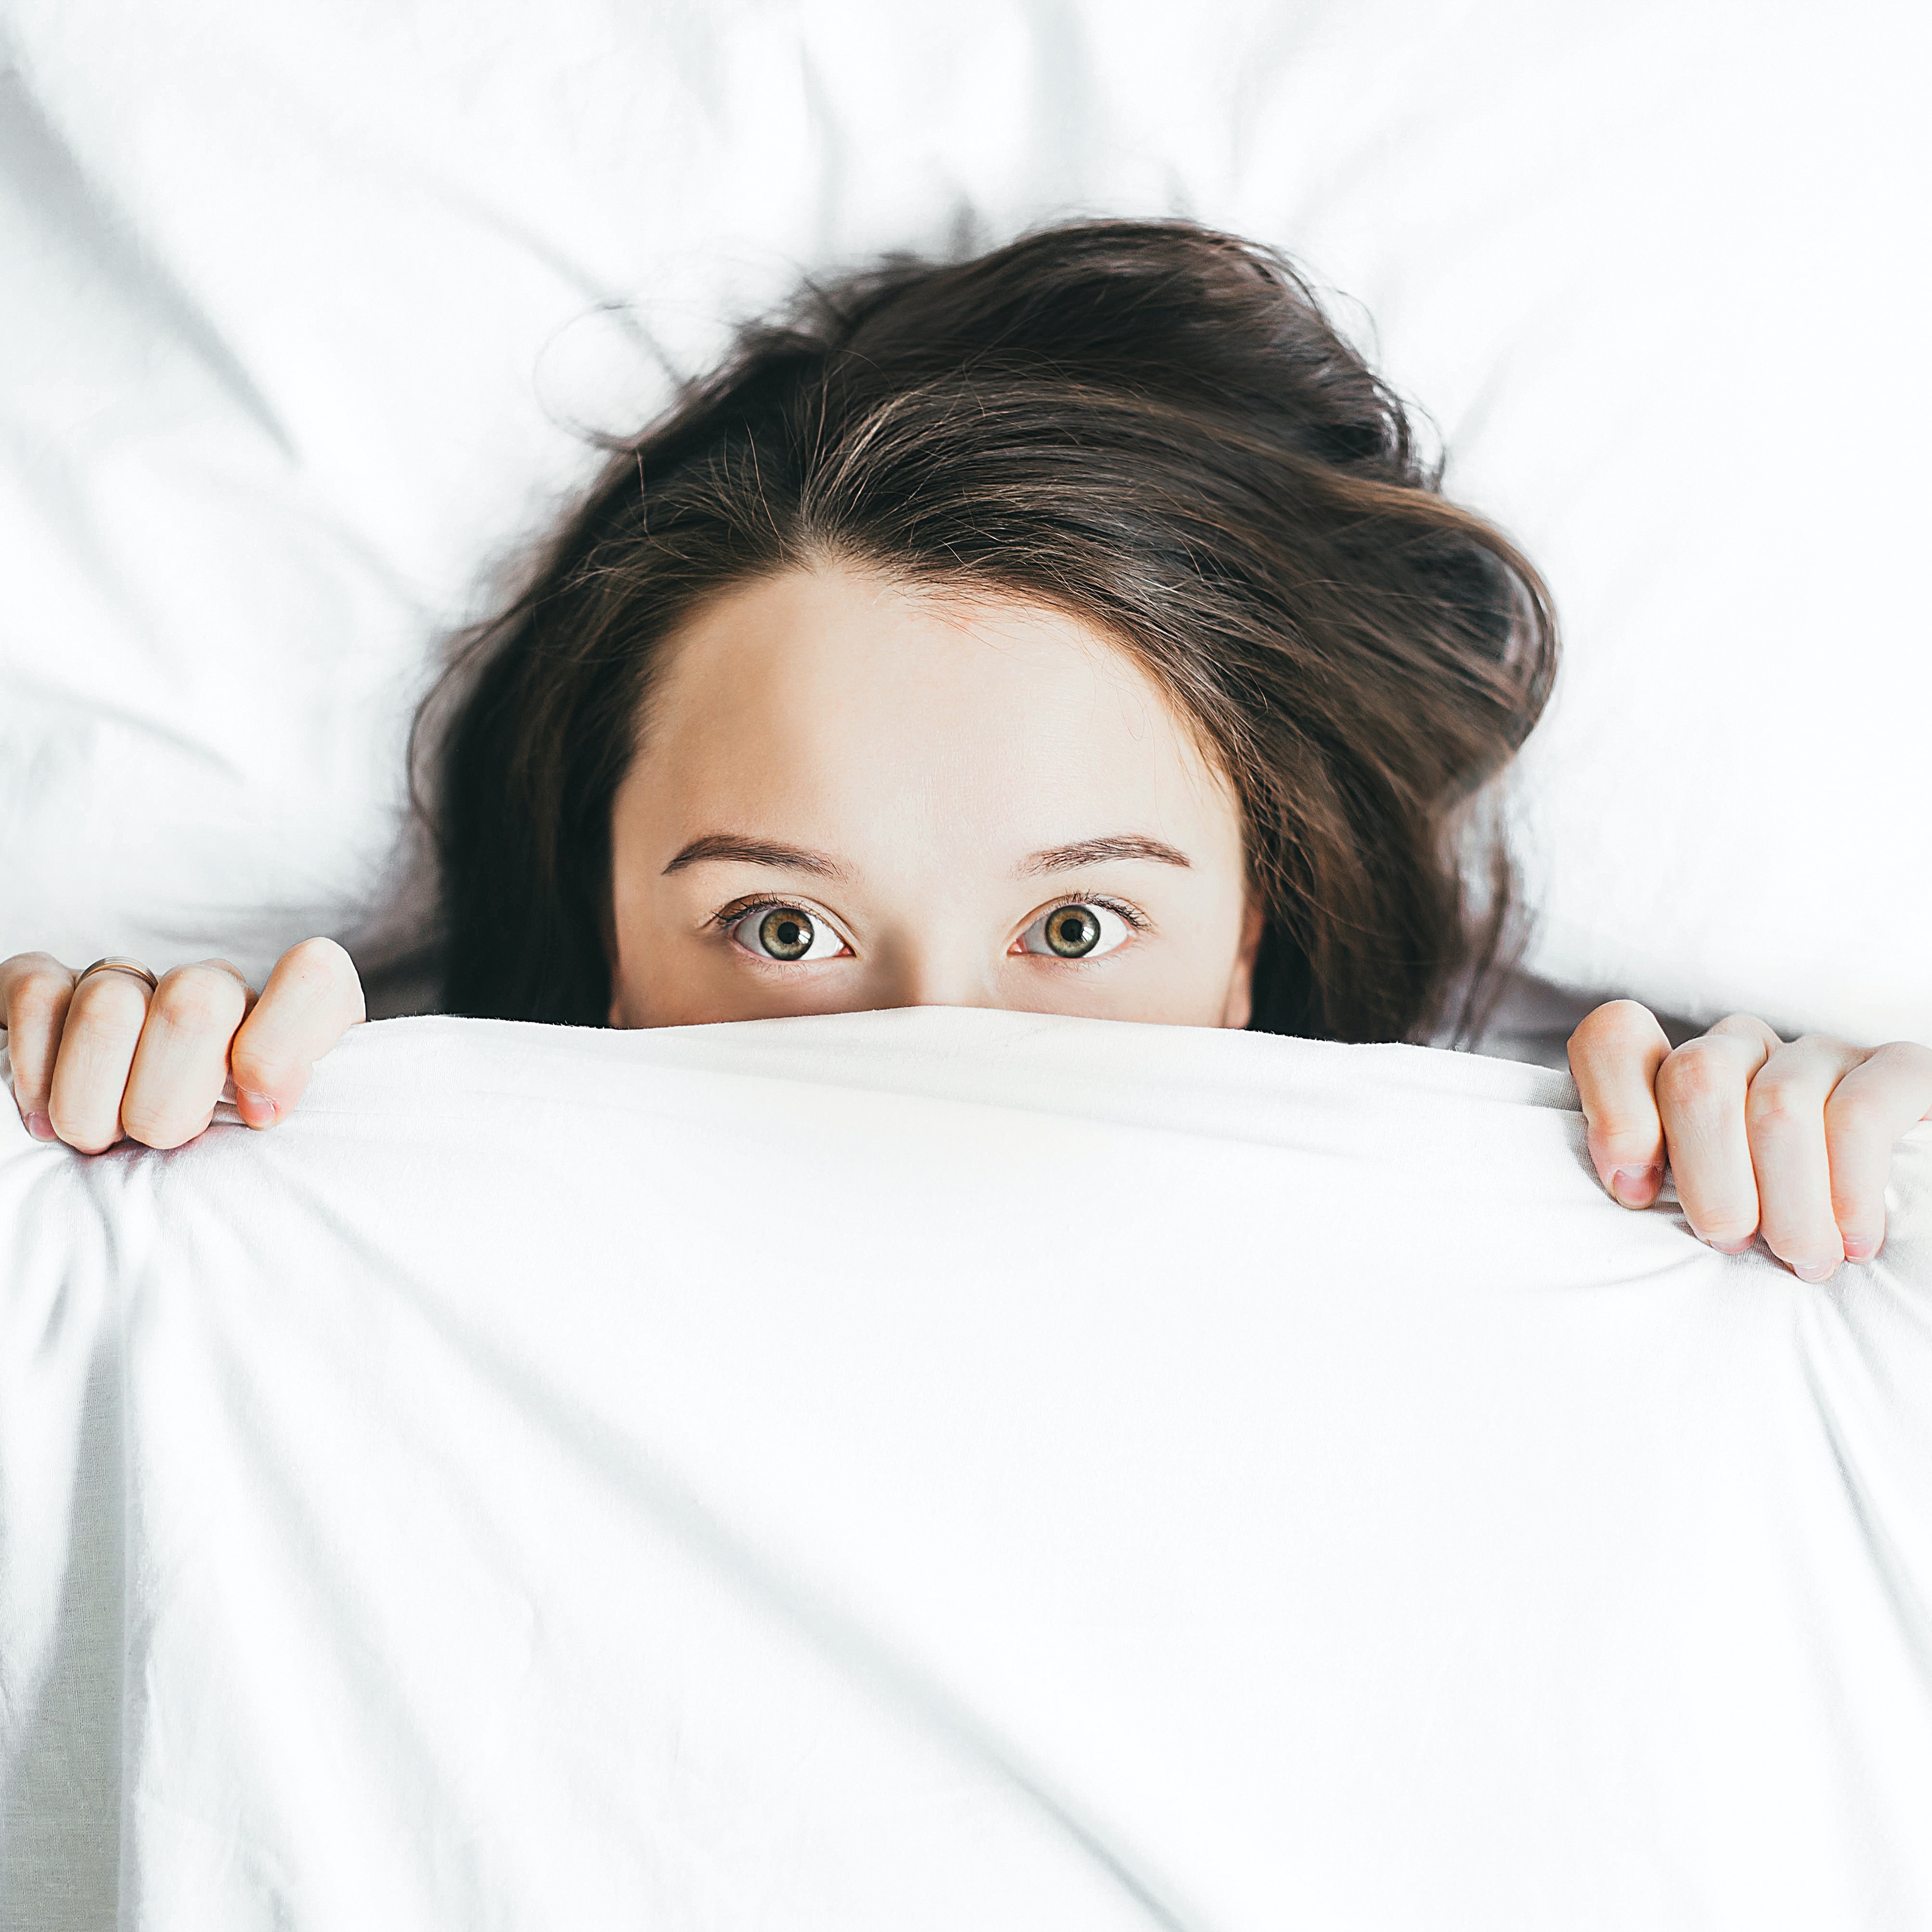 Woman awake in bed with blanket pulled up by her face.